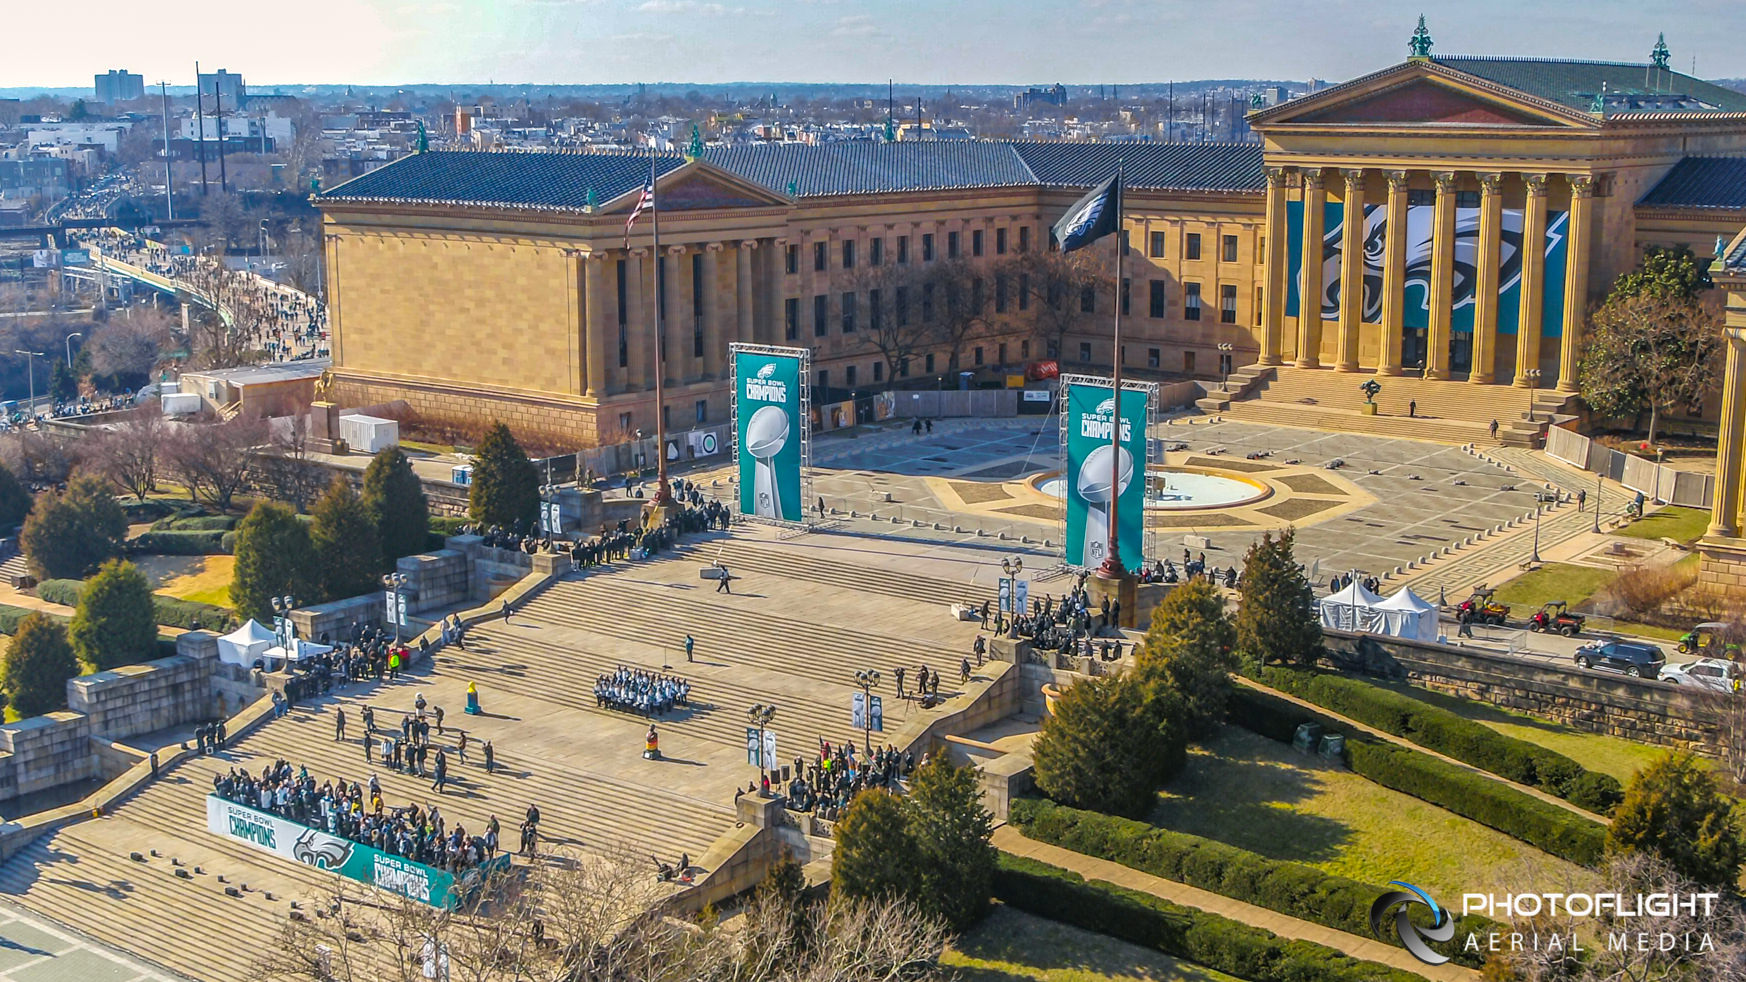 PhotoFlight Aerial Media Drone Coverage of the Spectacular Philadelphia Eagles 2018 Super Bowl Victory Parade